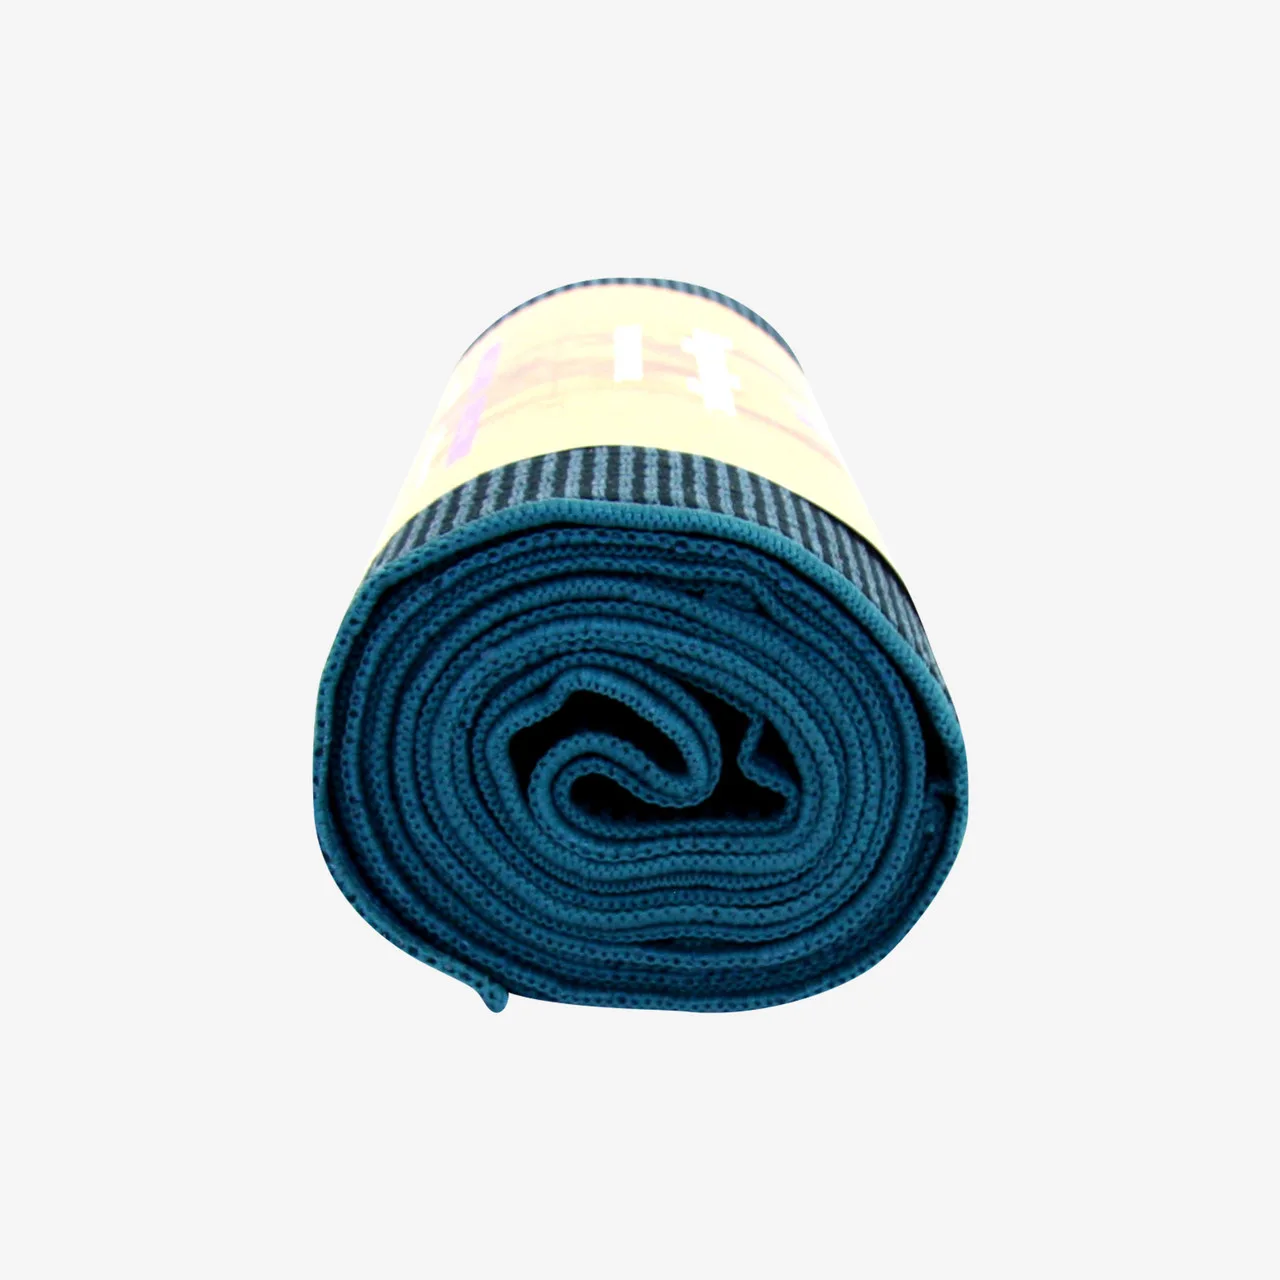 Youphoria Hot Yoga Towel - The perfect addition to your yoga mat.